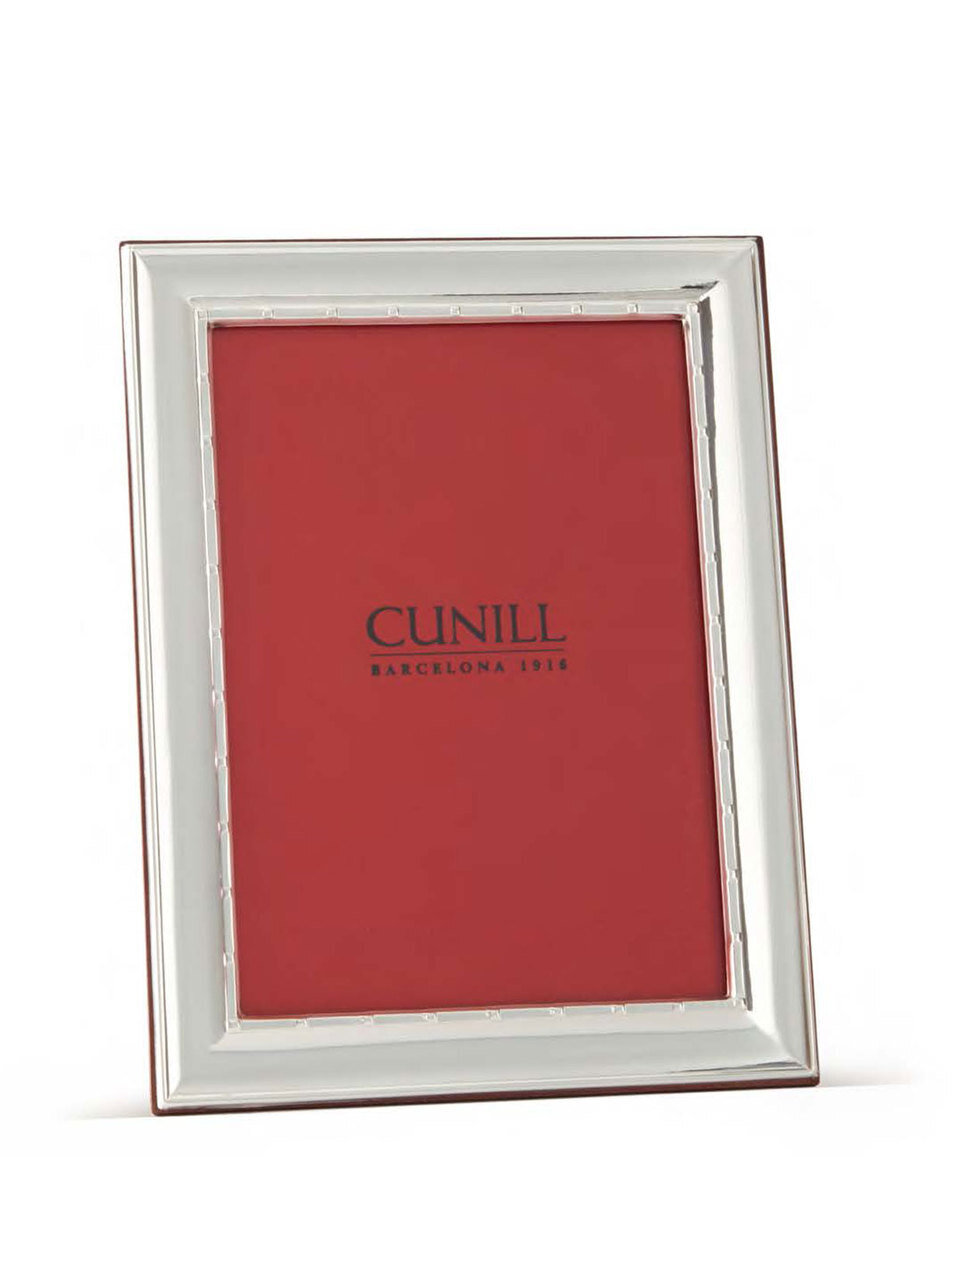 Cunill 5000 5 x 7 Inch Picture Frame - Sterling Silver